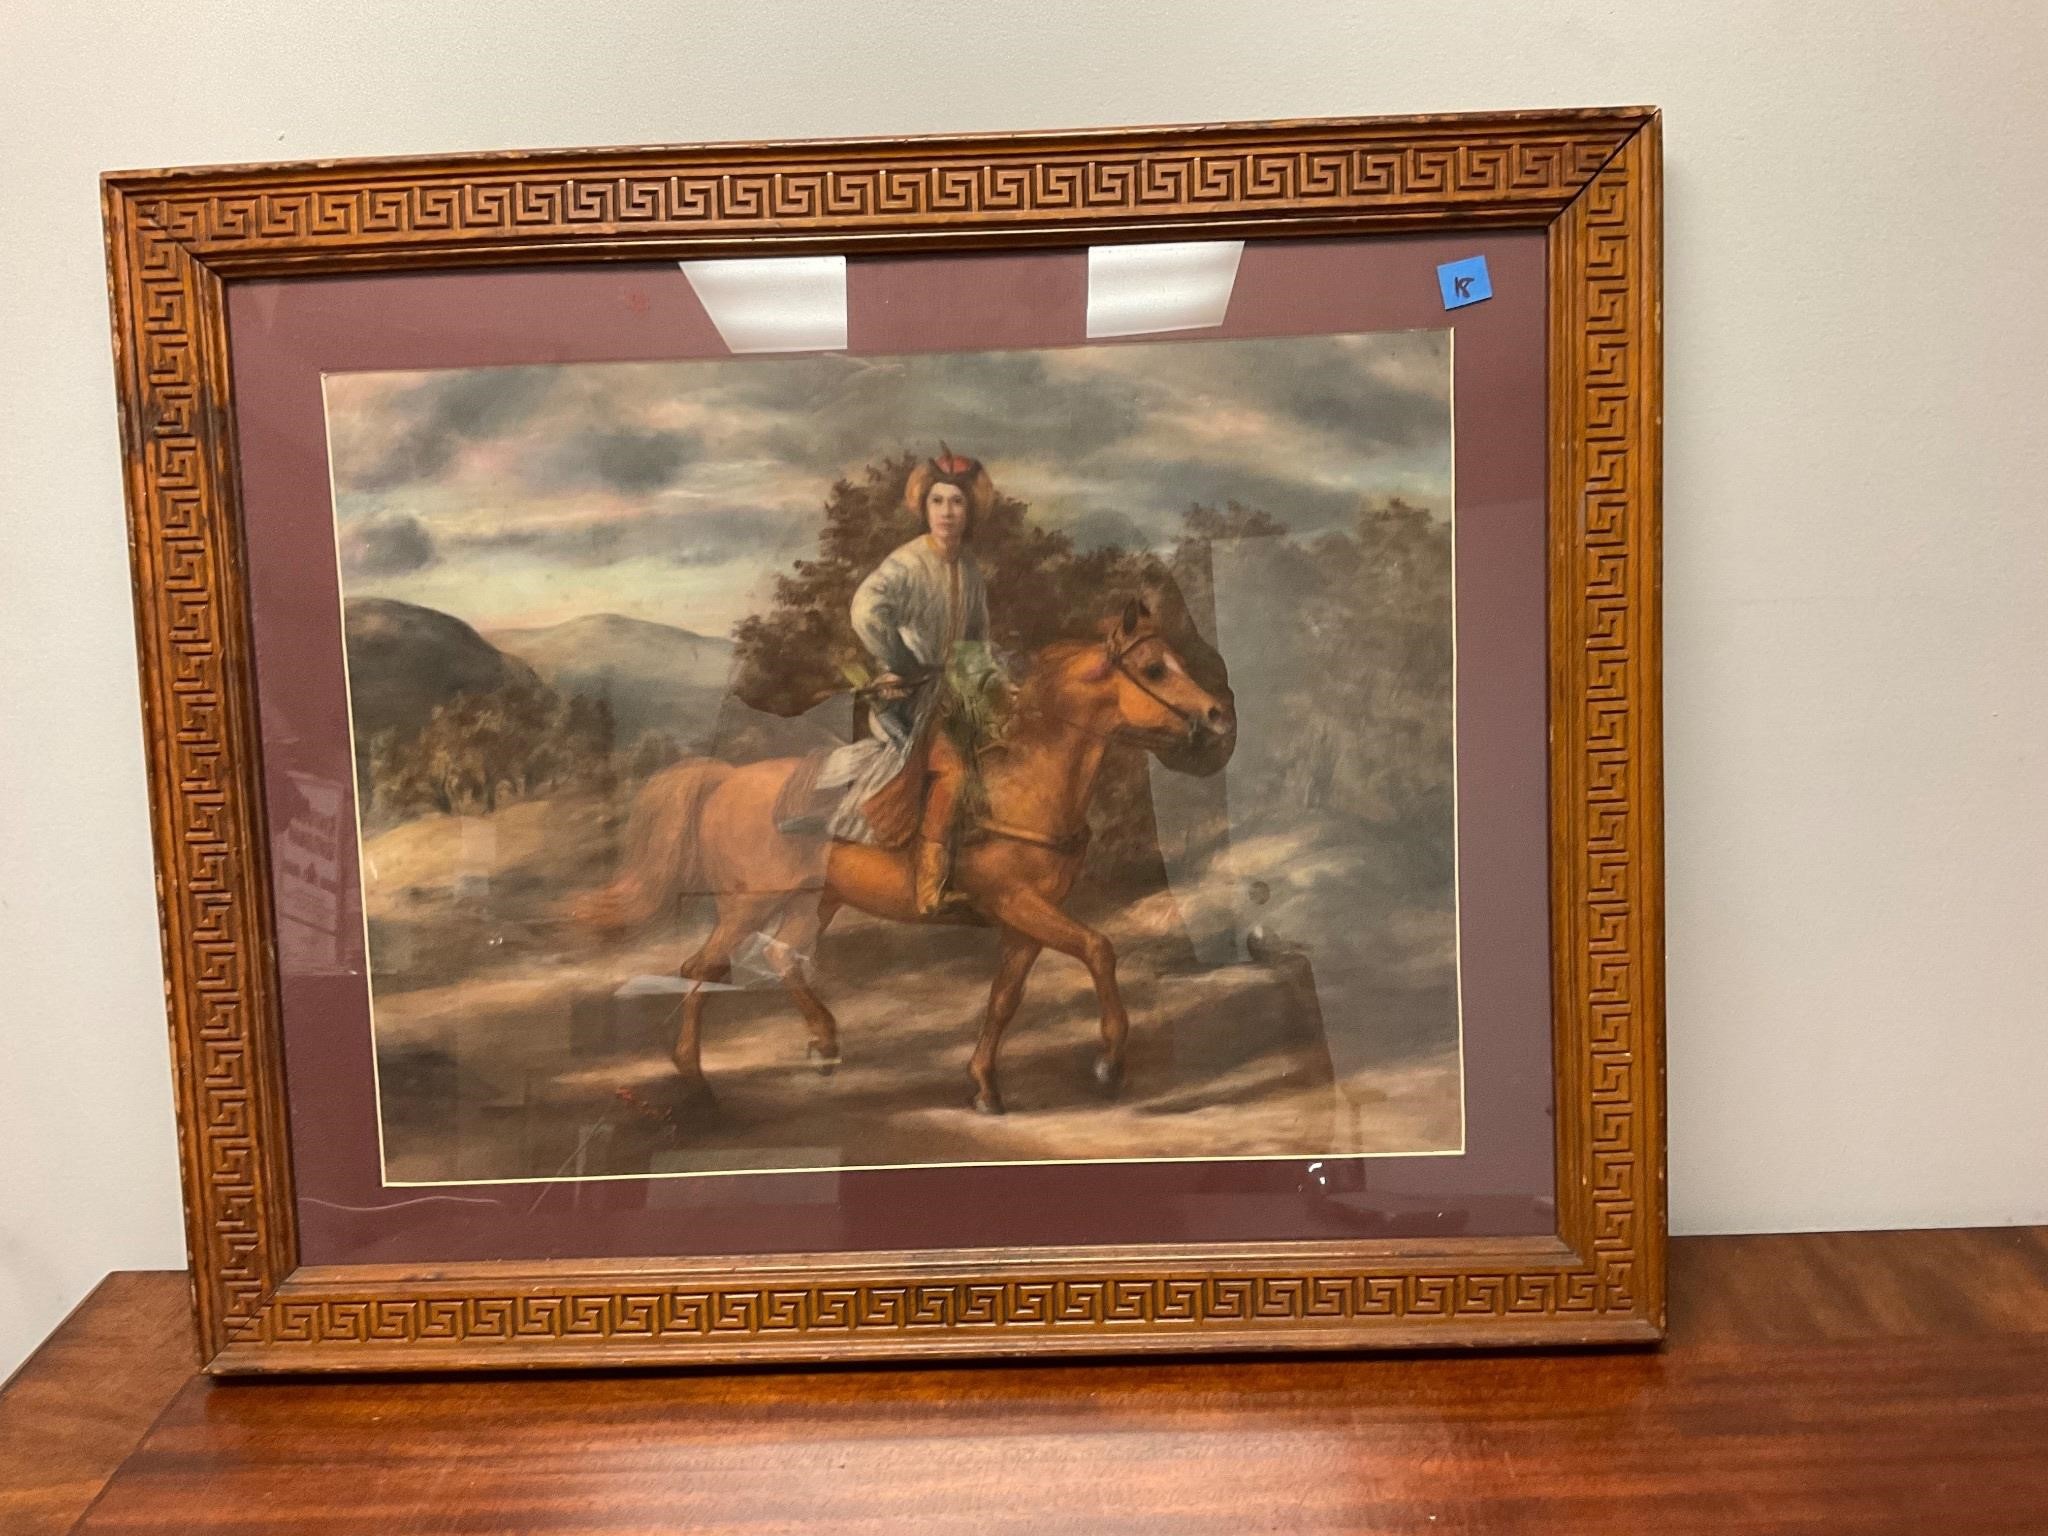 Online Artwork at the Auction House